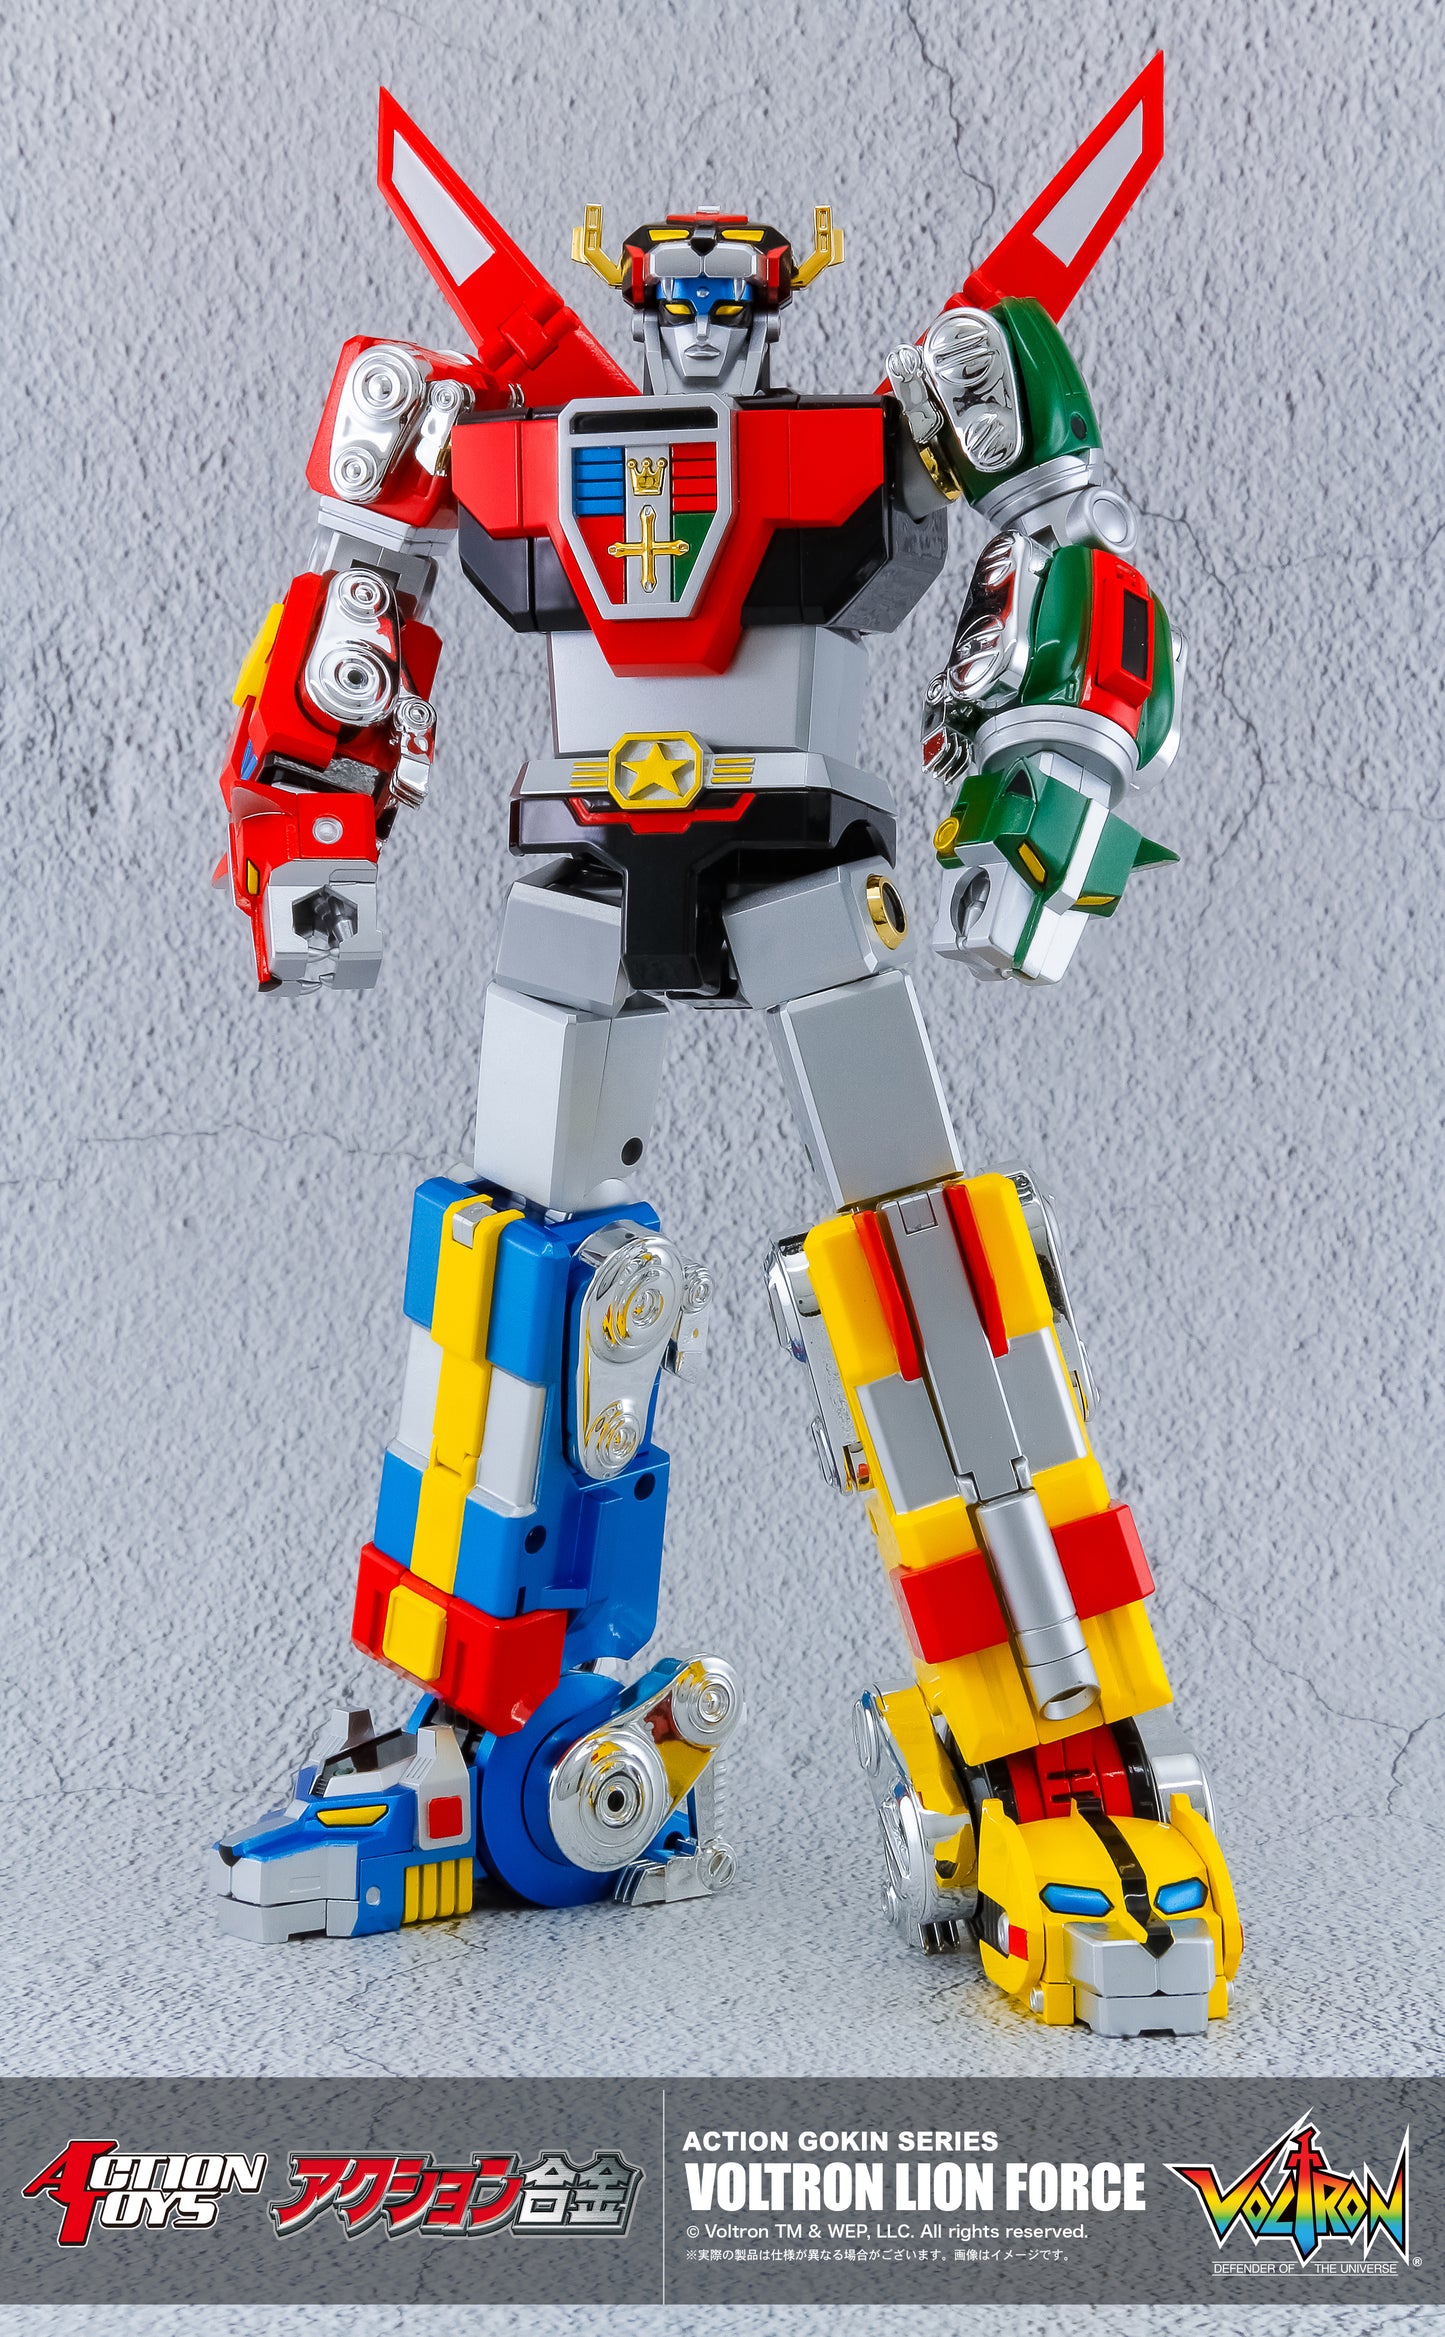 Action Toys Action Gokin Series Voltron Lion standing strong